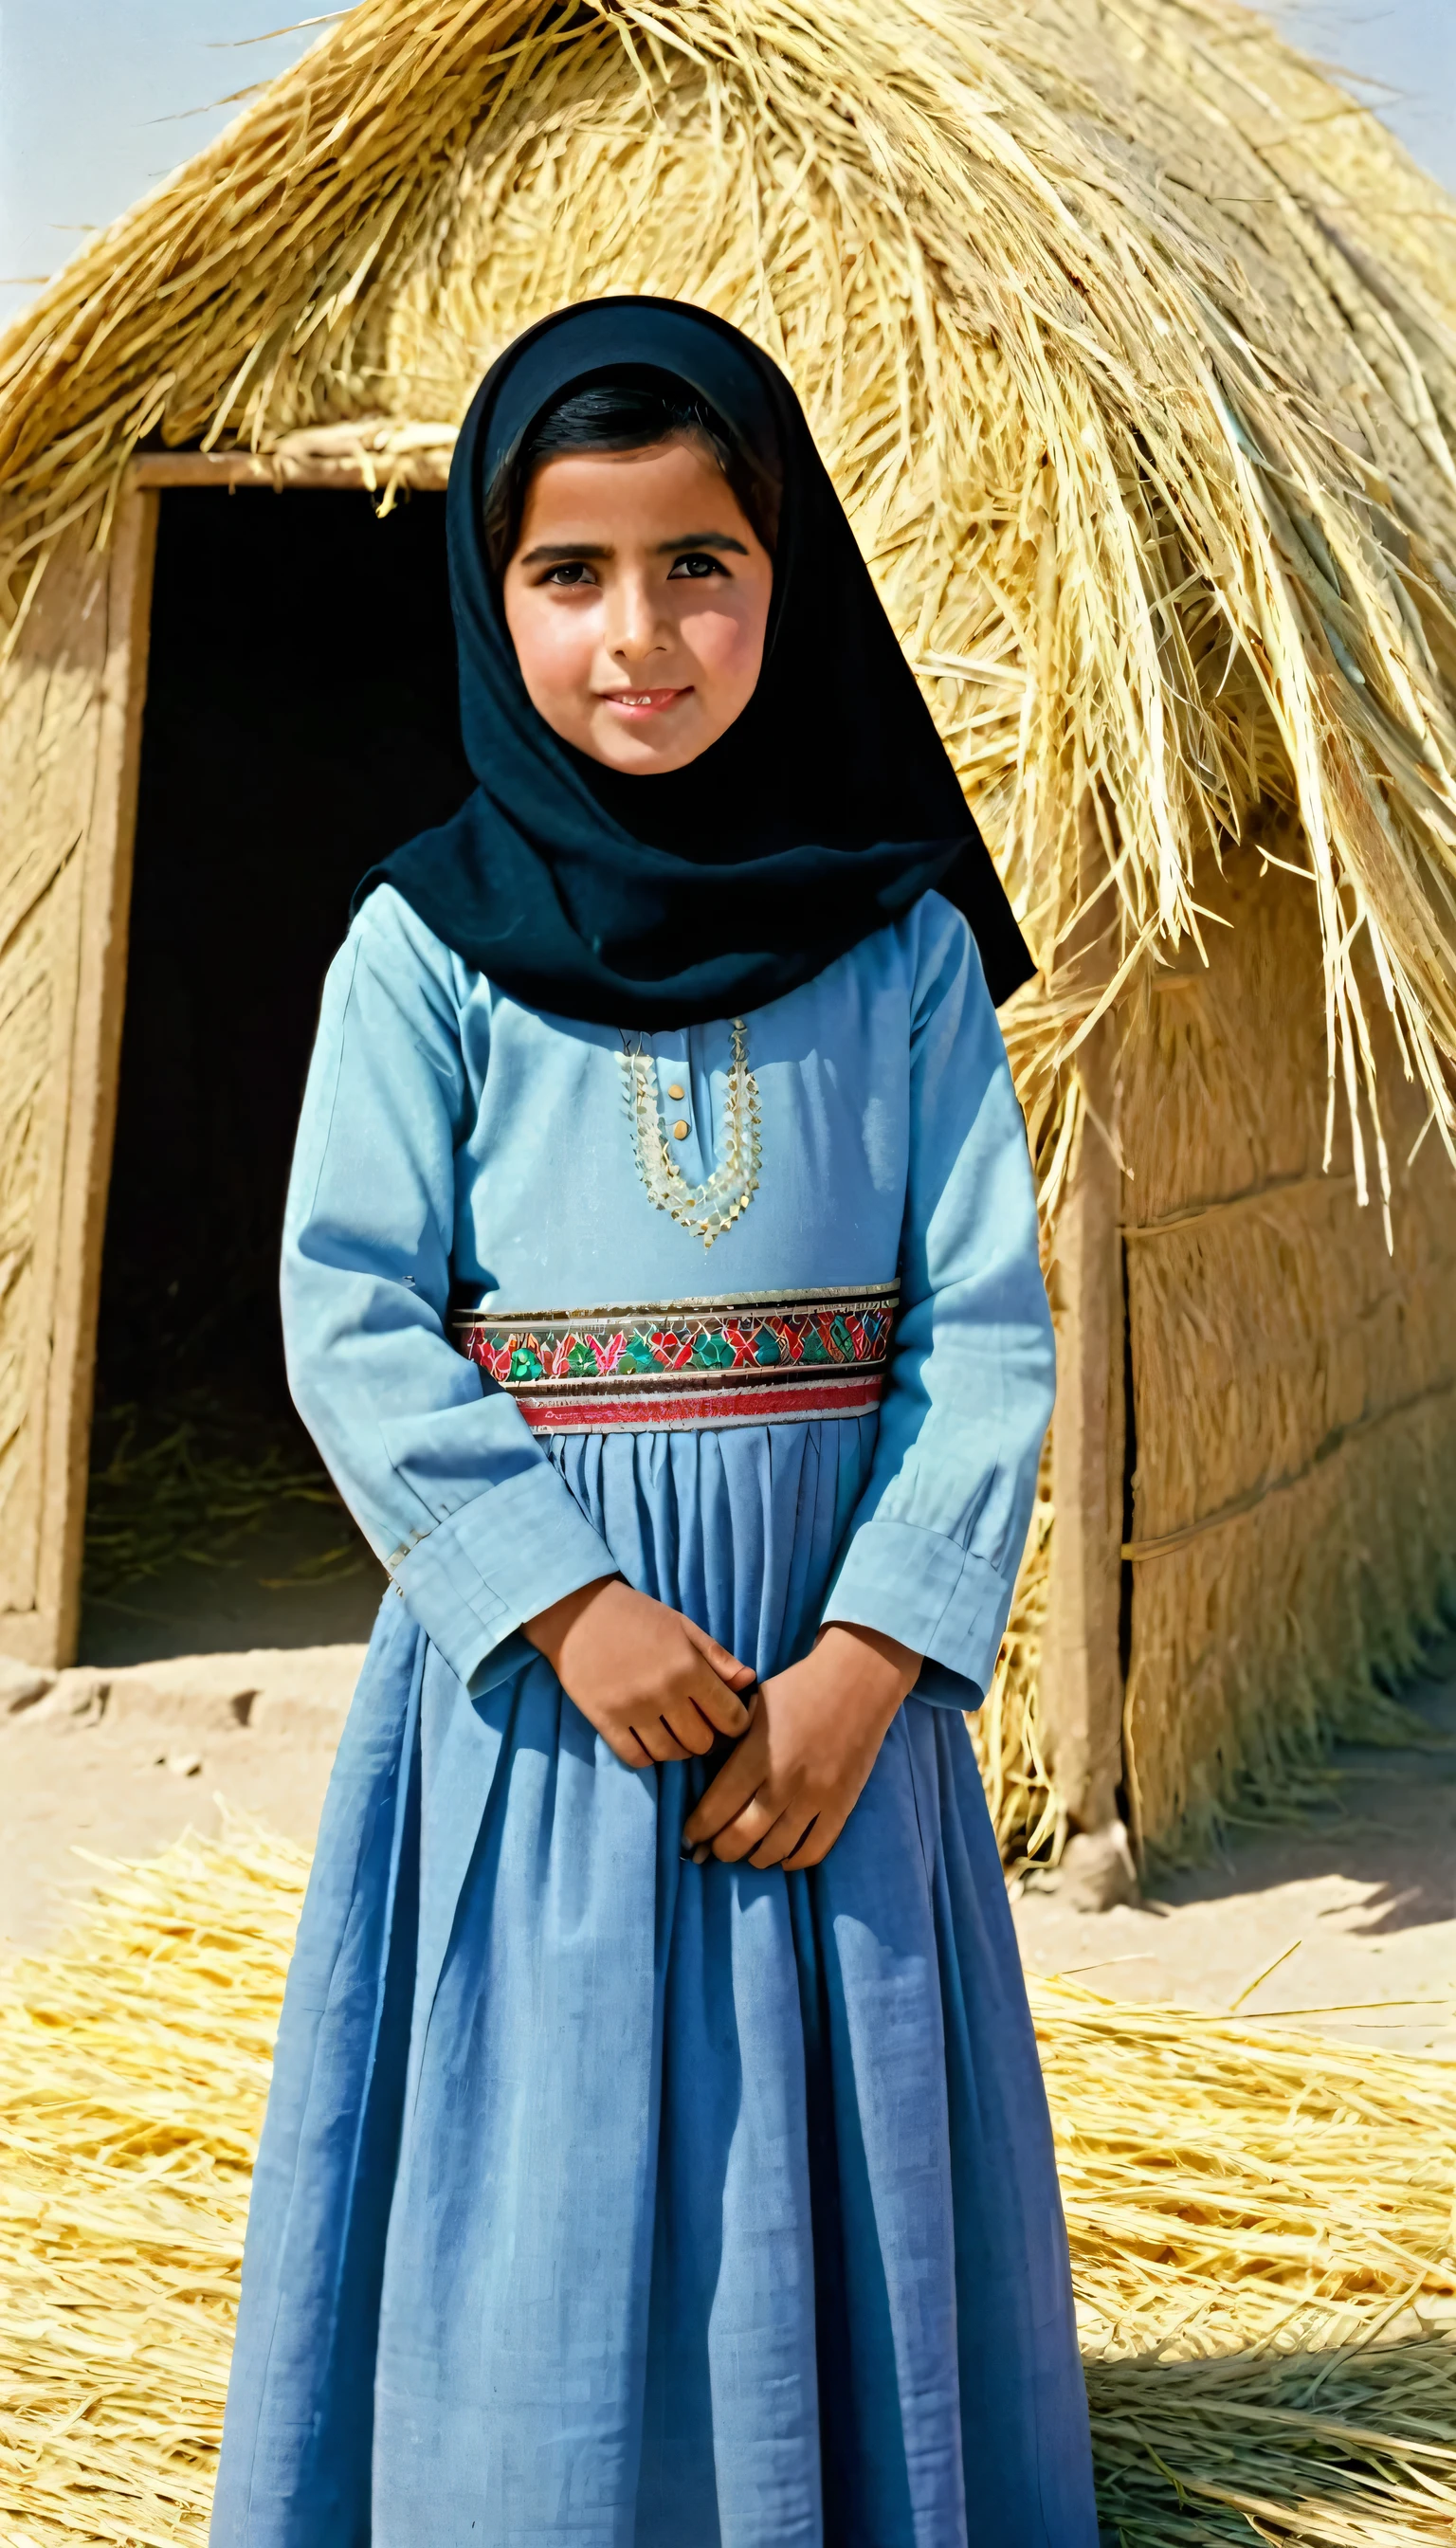 1girl, 6-years old, solo, an Iraqi  wearing traditional clothing at the theshold of a hut, wearing hijab, background includes hay and outdoor elements, black_hair, standing, looking_at_viewer, 1950s